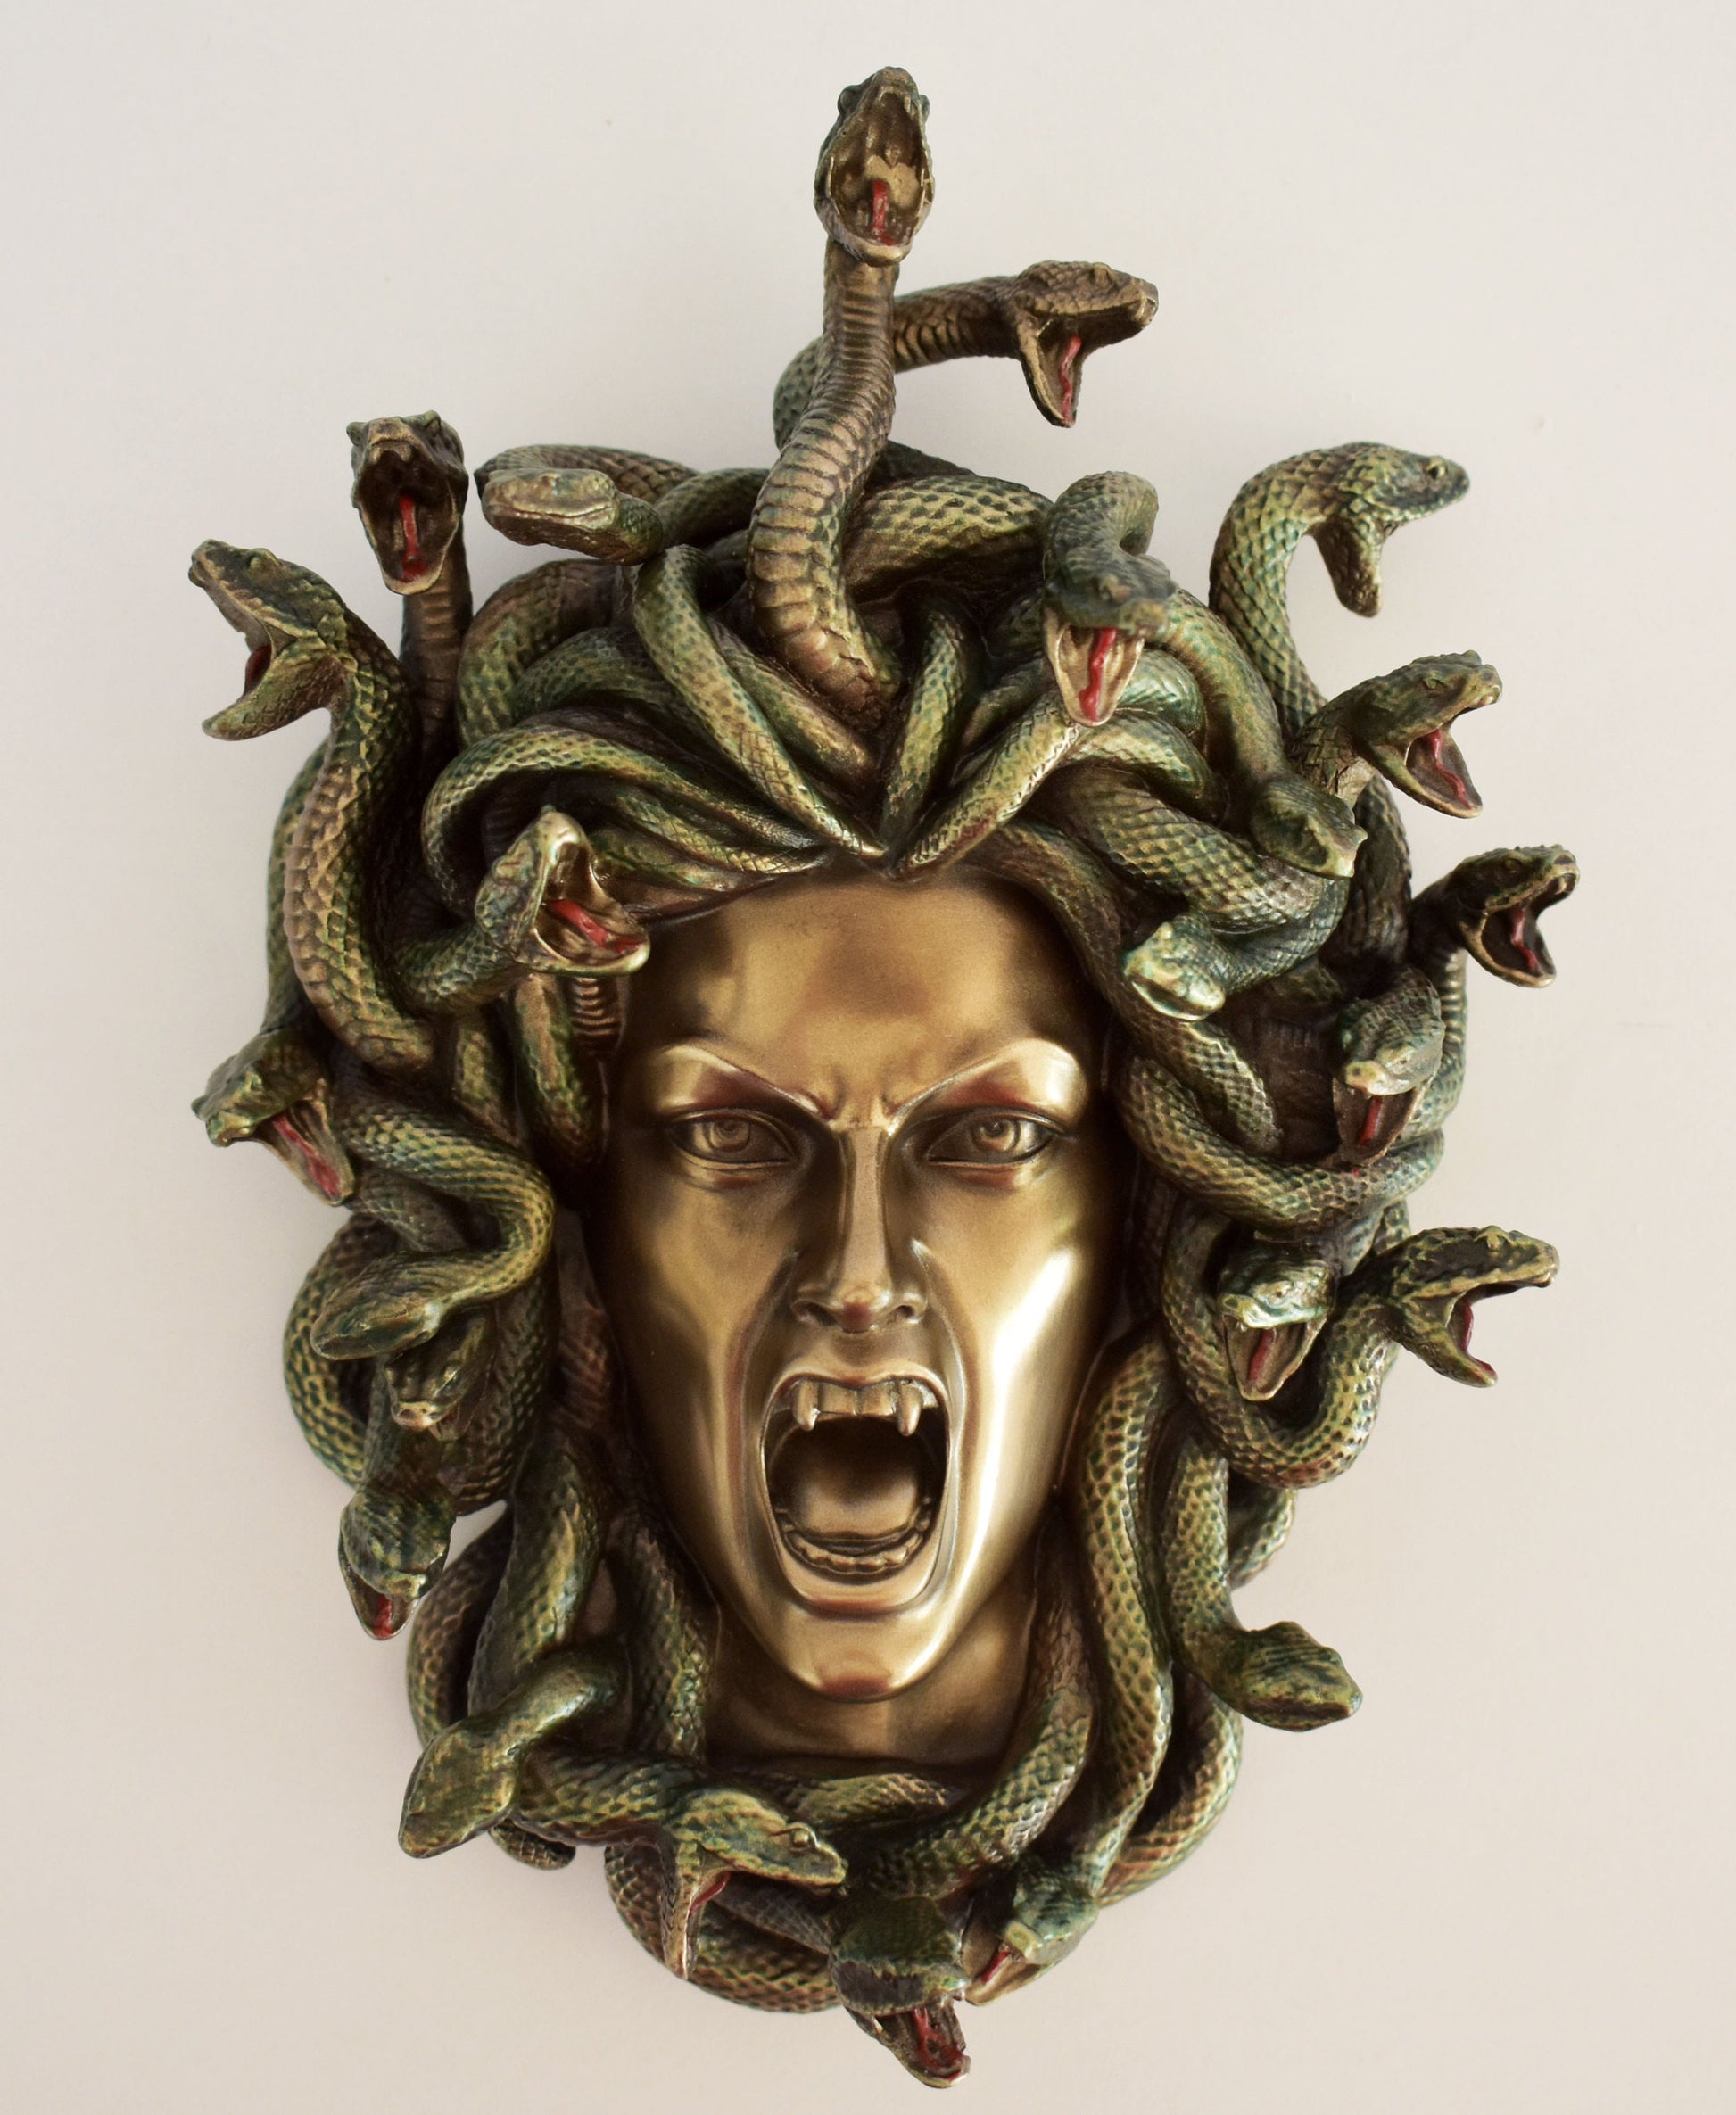 Medusa, Gorgo, greek alabaster statue in gold tone, the mythical creature